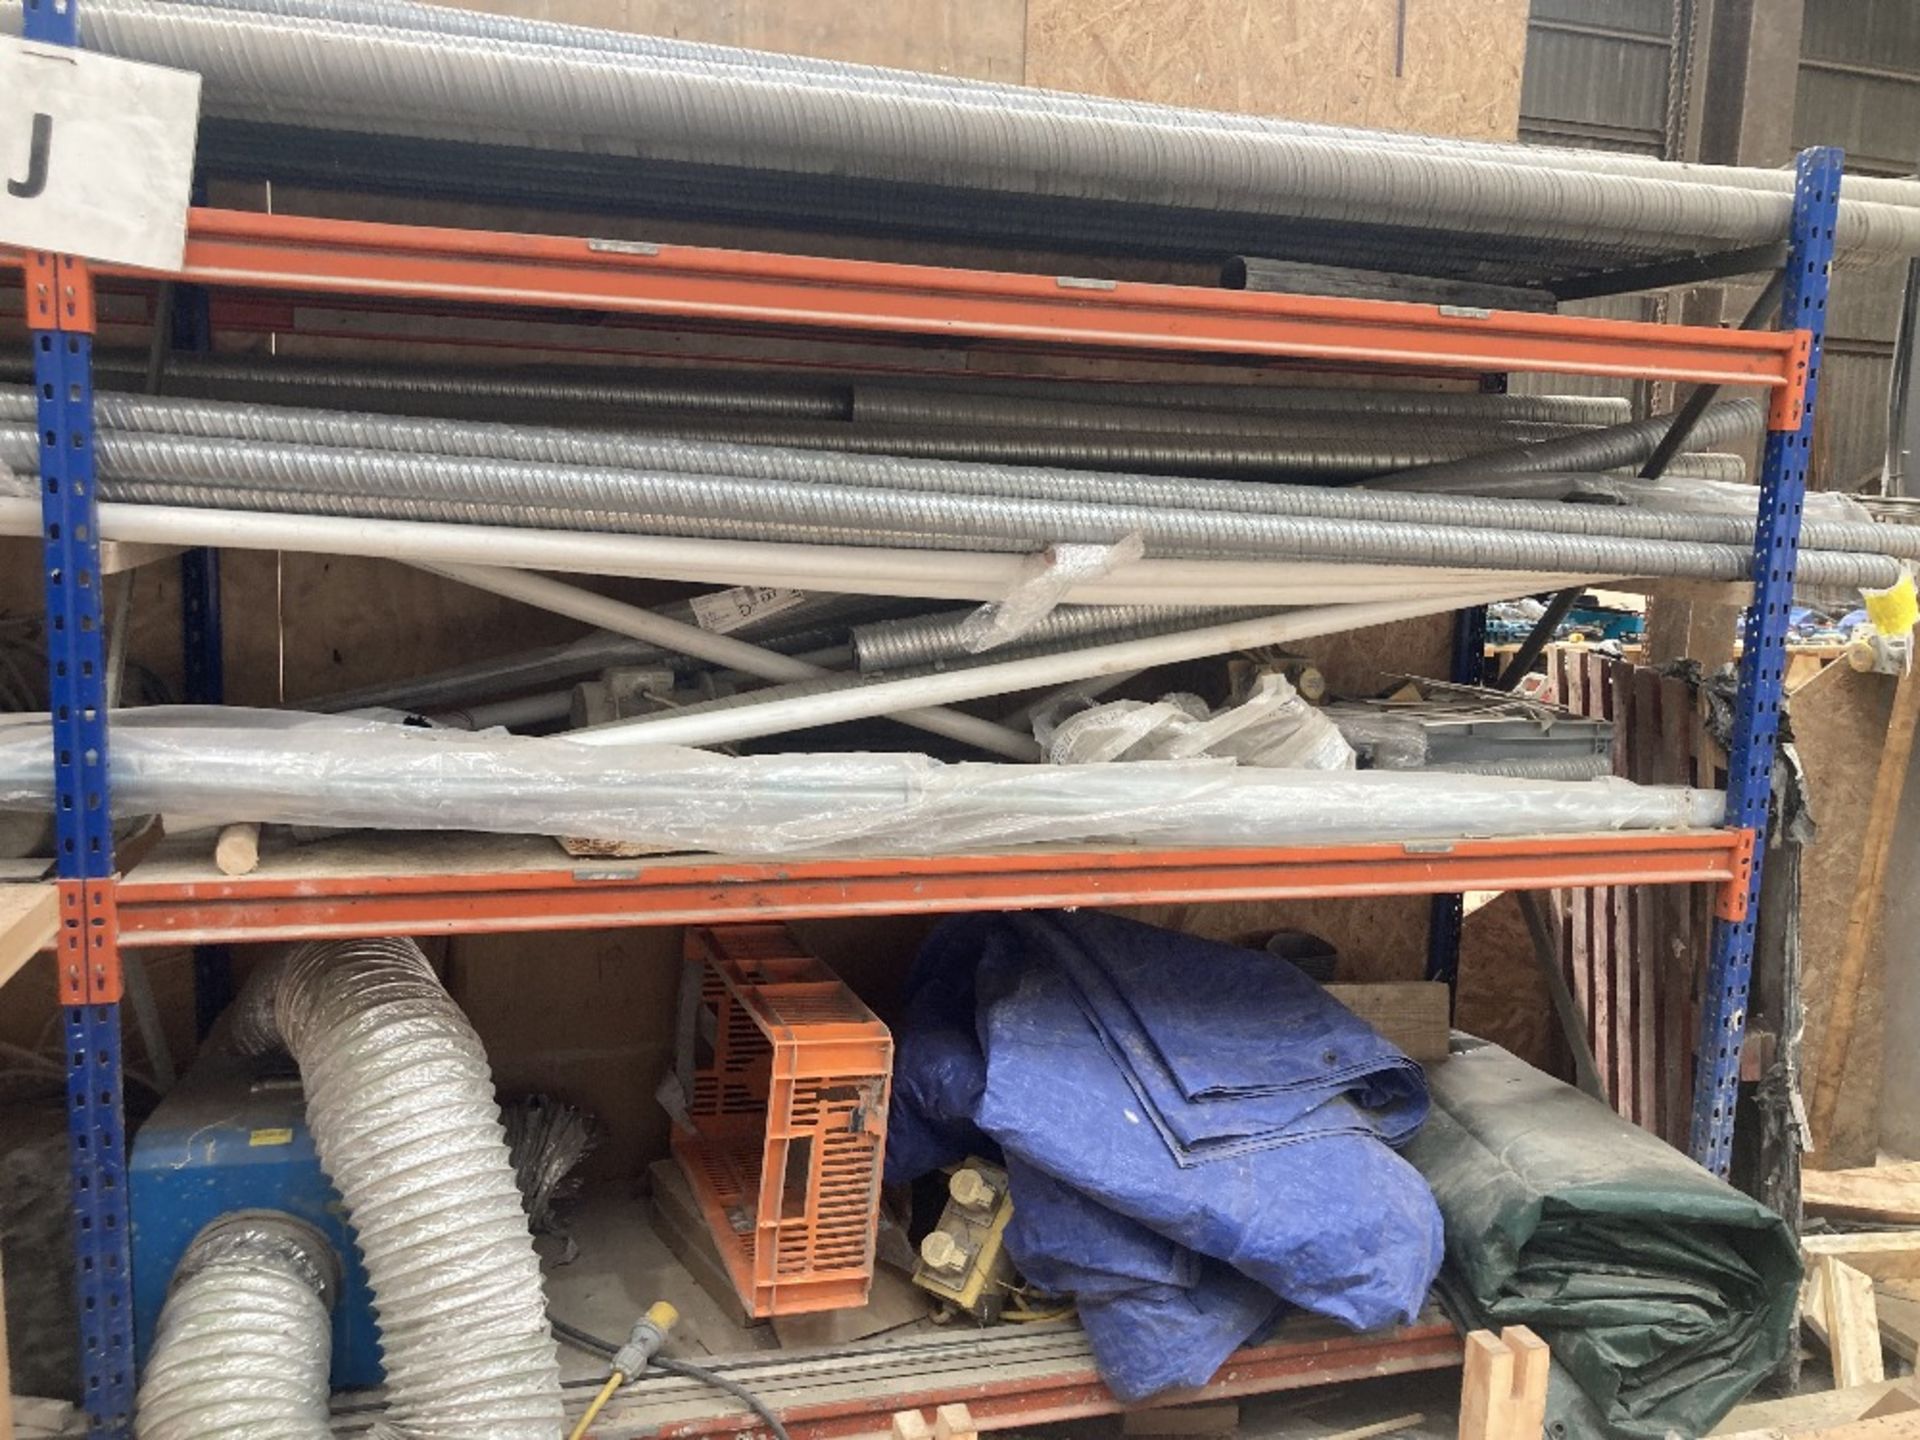 3 Shelf Racking With Contents To Include Heater, Wire Reels Material Offcuts, Tarpaulin Etc - Image 4 of 9